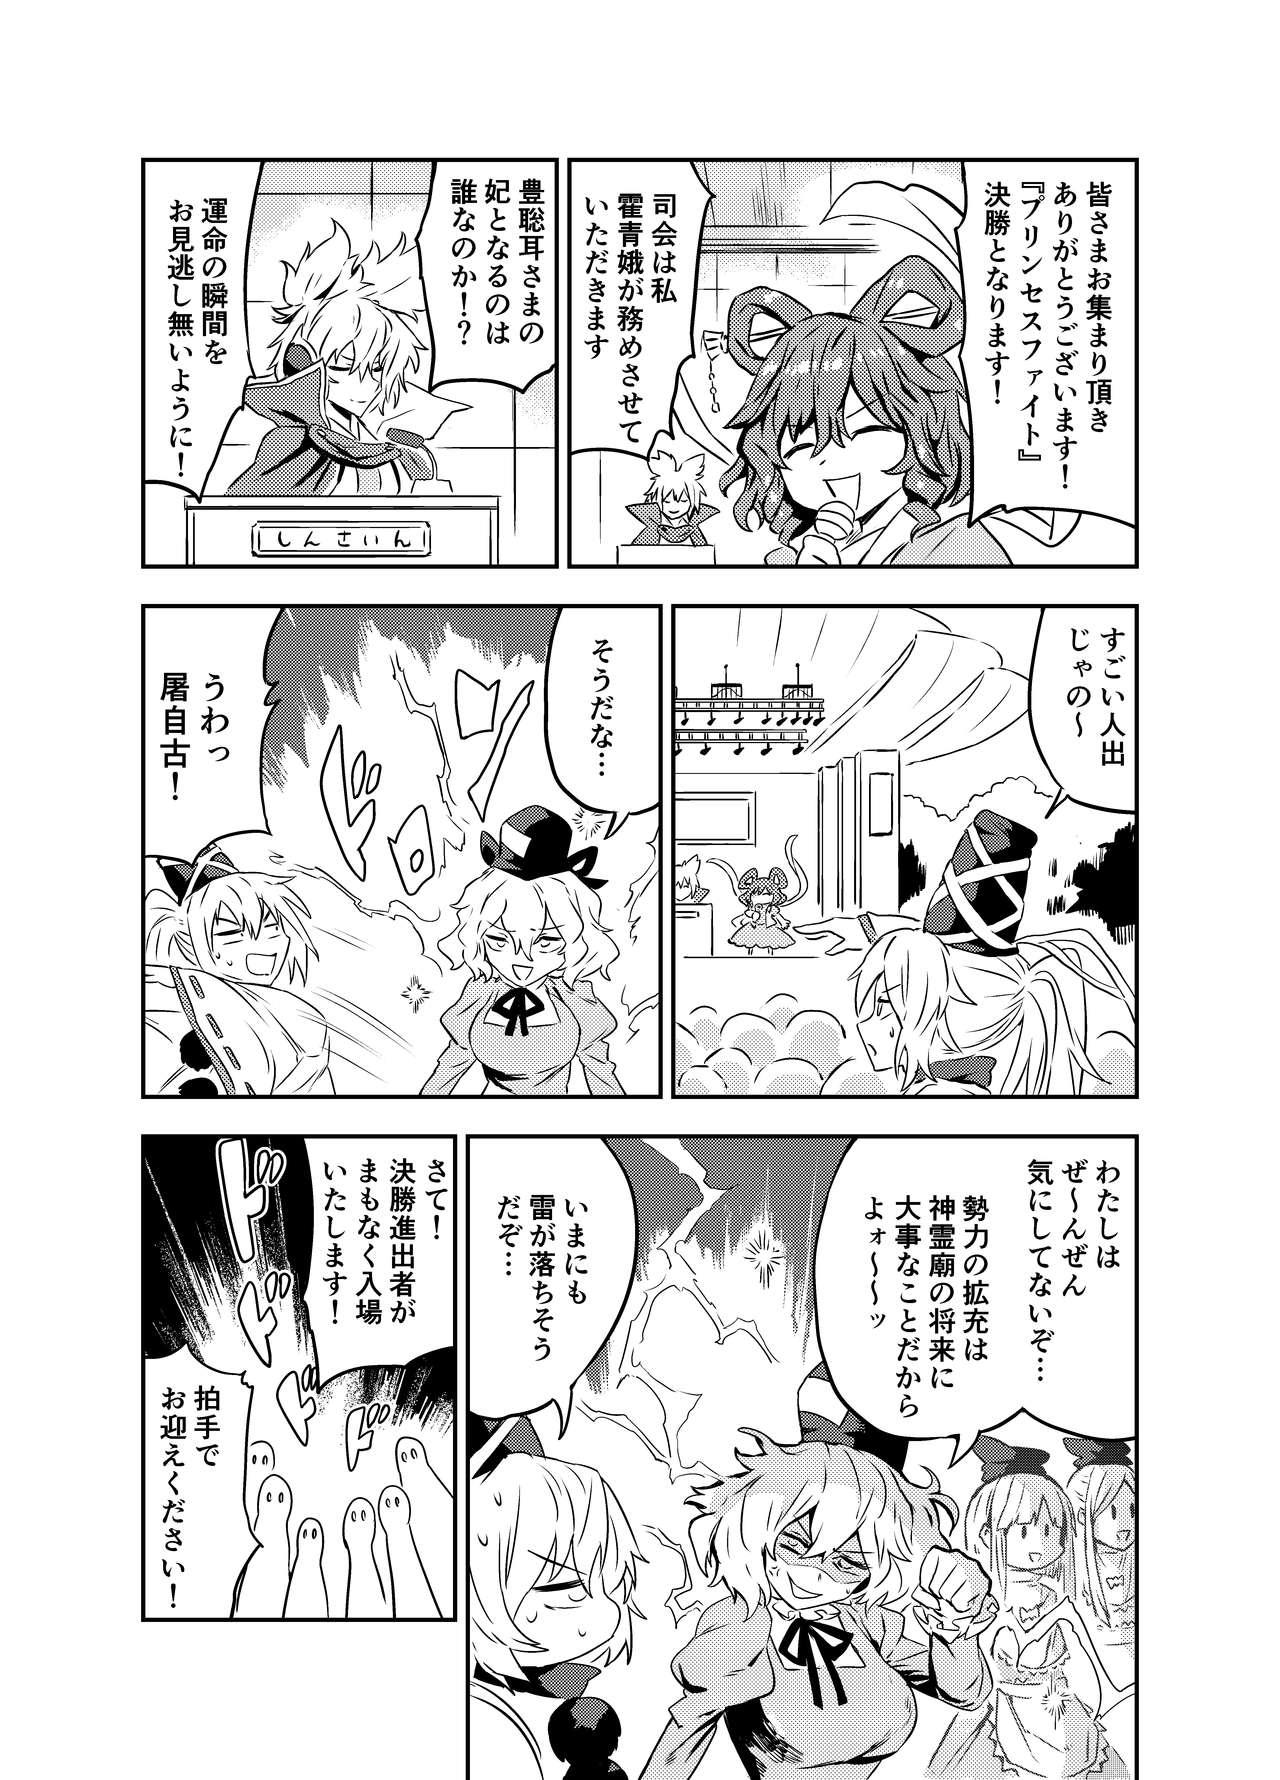 Tinytits Princess Fight - Touhou project Morena - Page 4